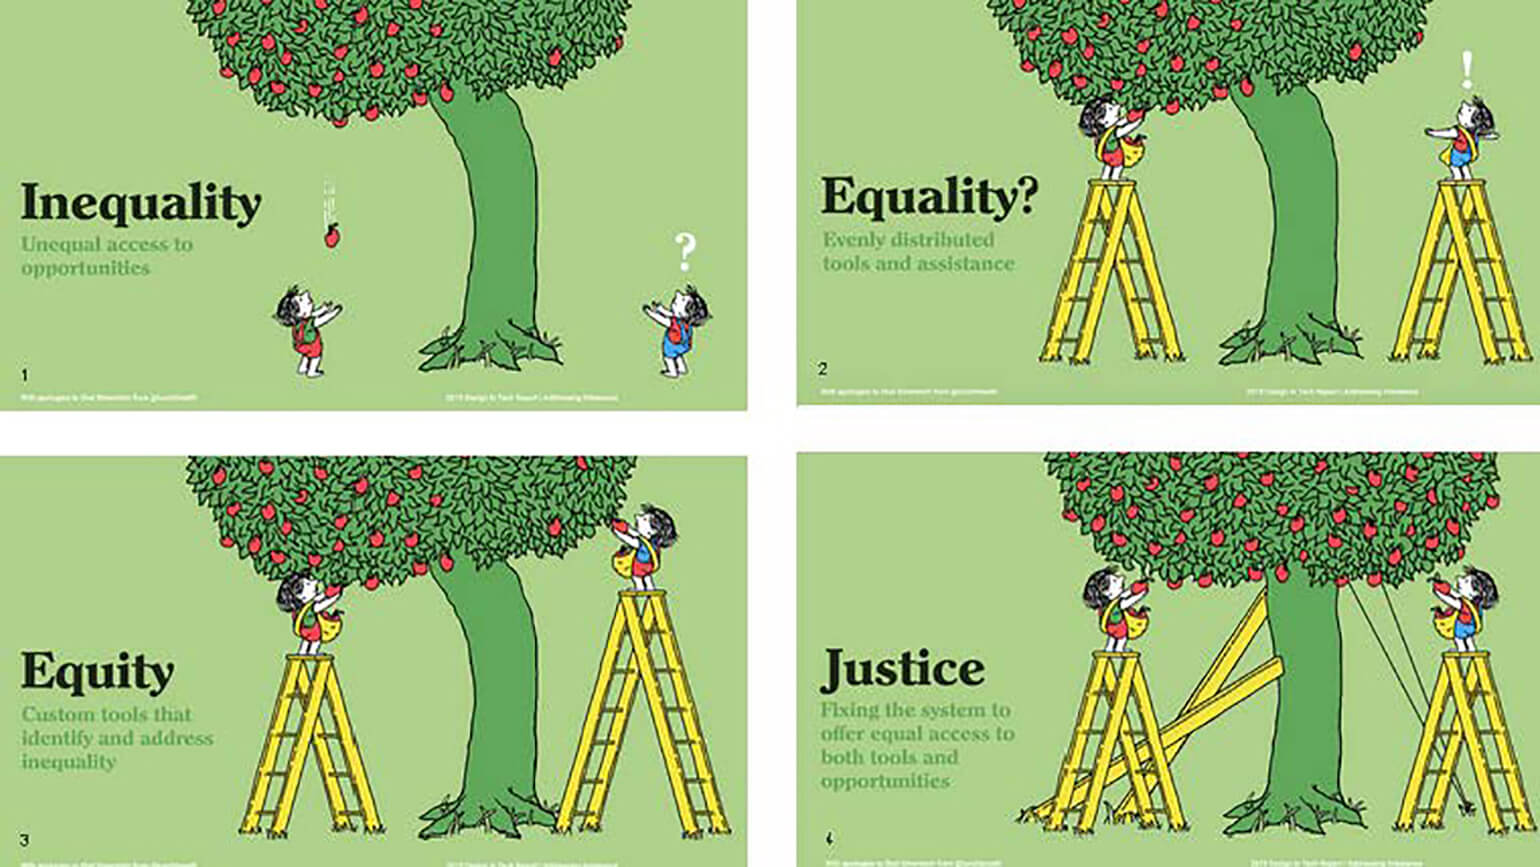 4 images from Shel Silverstein's The Giving Tree. Two children are looking to harvest apples. Each graphic shows a different way in which these children obtain the apples. Showcasing inequality, equality, justice, and equity.